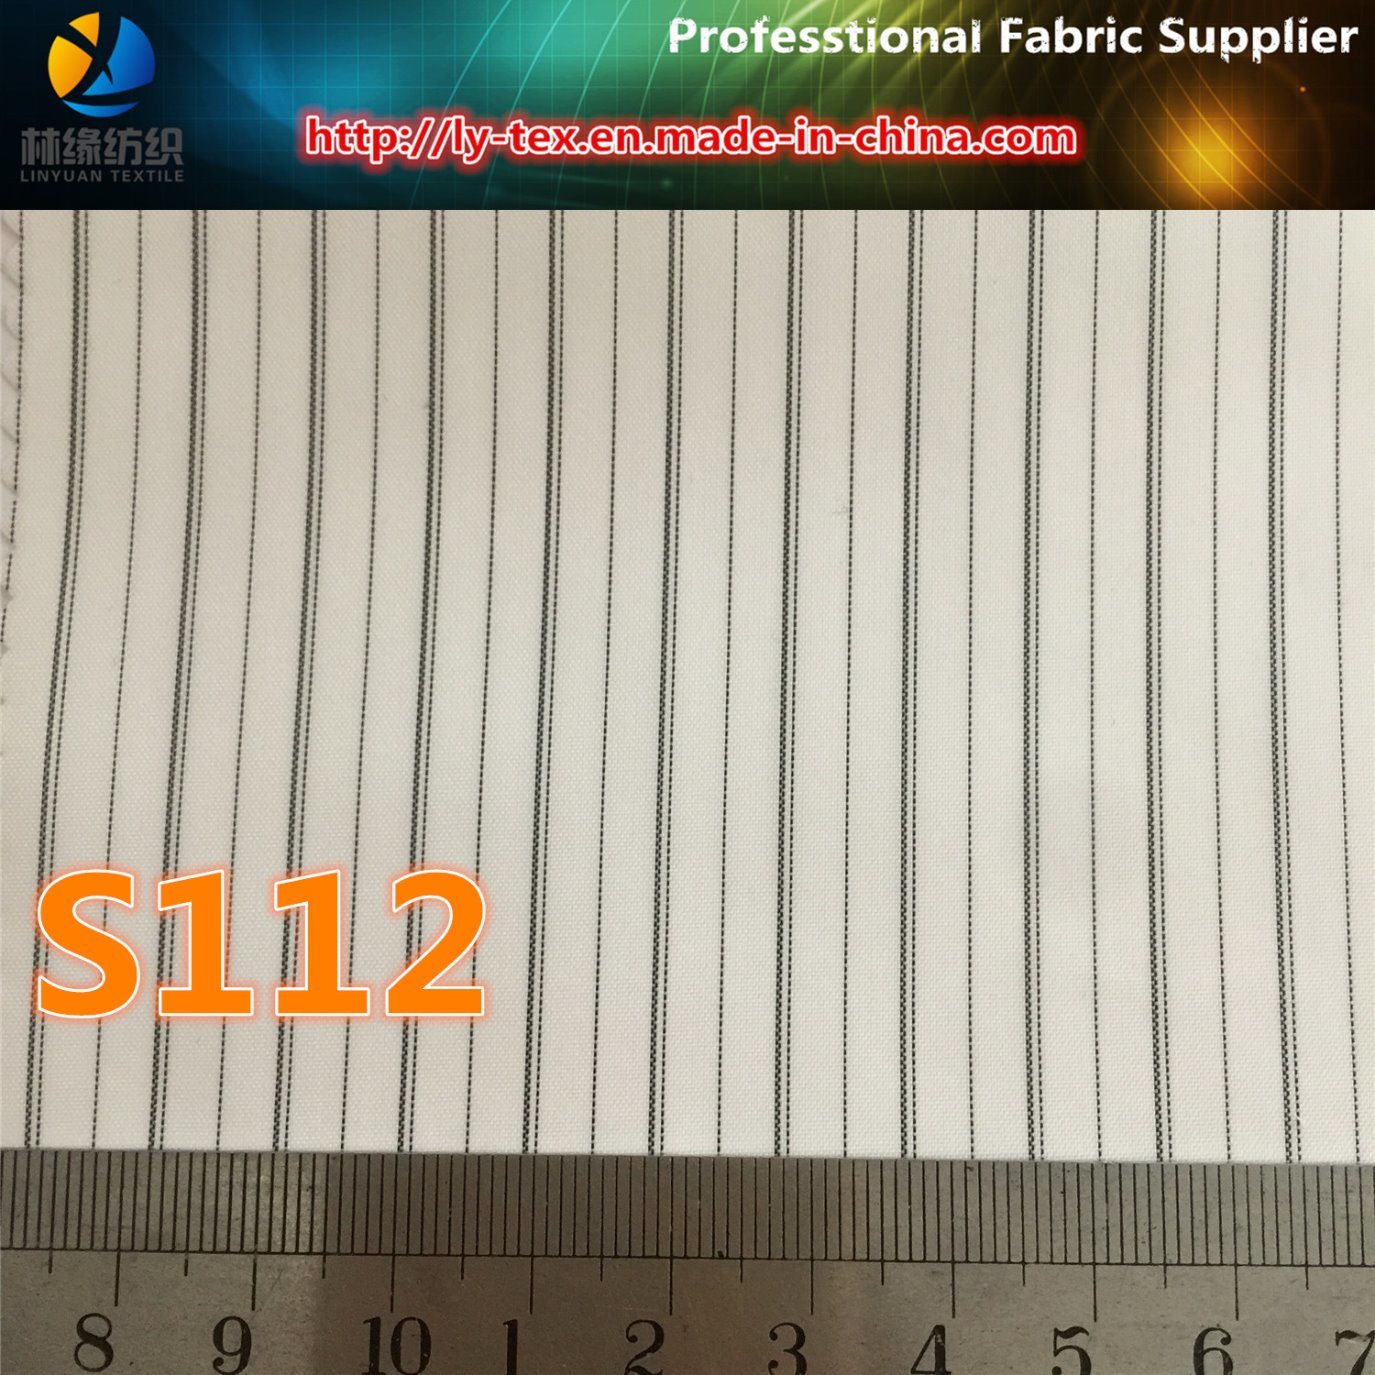 White Sleeve Lining, Polyester Stripe Suit Lining Fabric (S112.168)